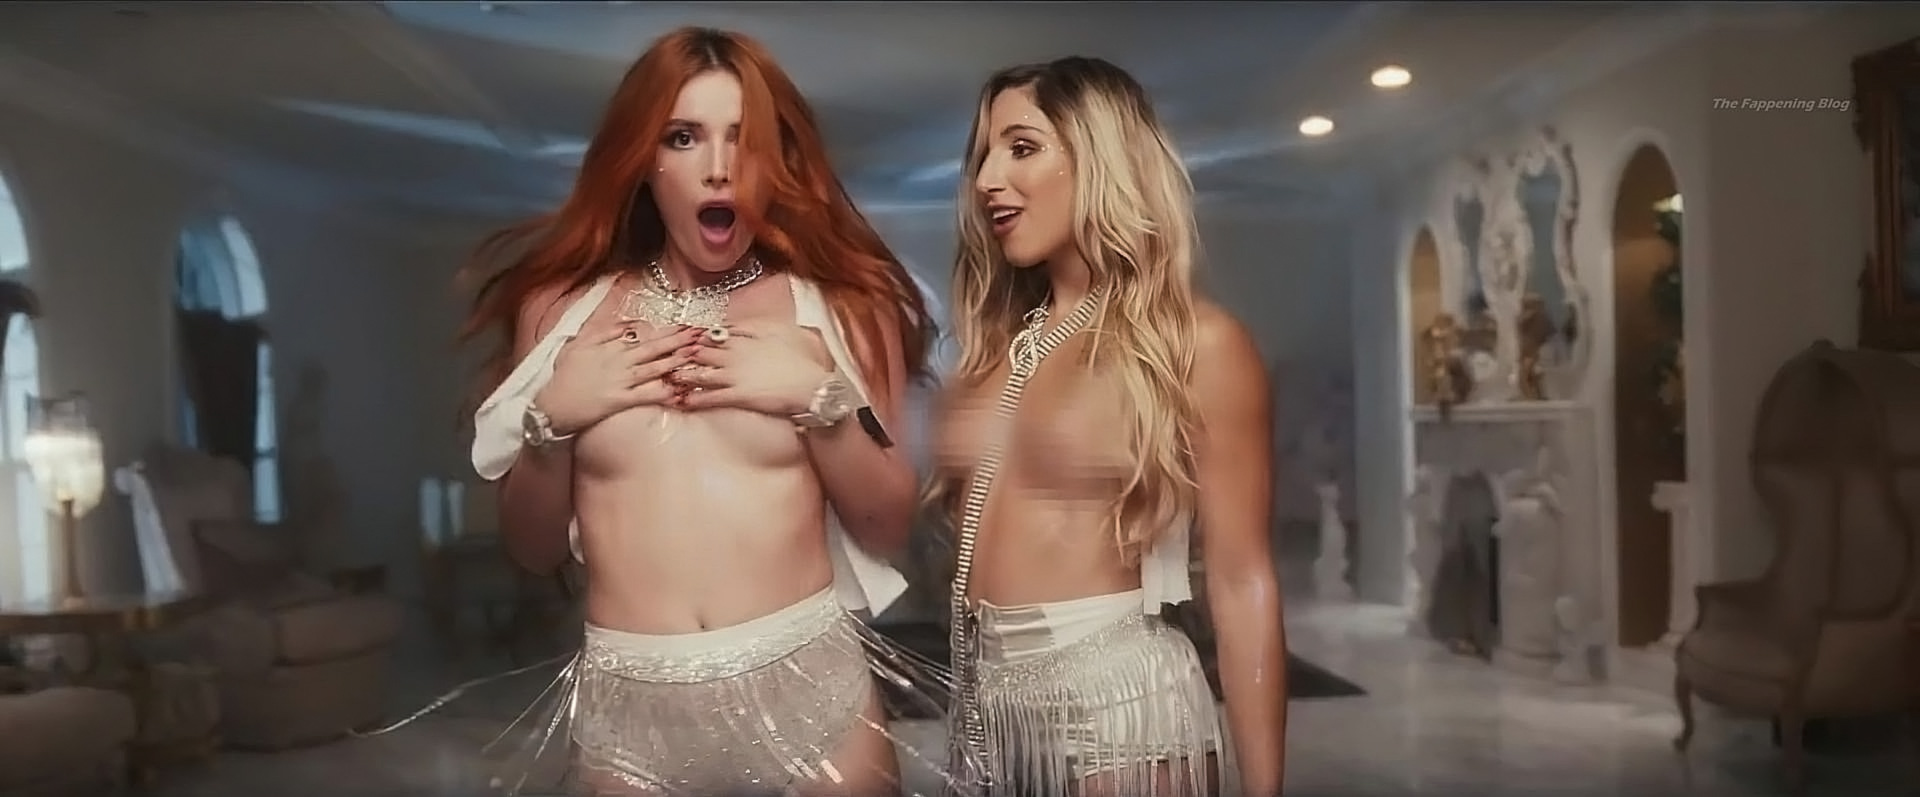 Bella Thorne’s nude boobs before shooting a new sex scene for her account o...